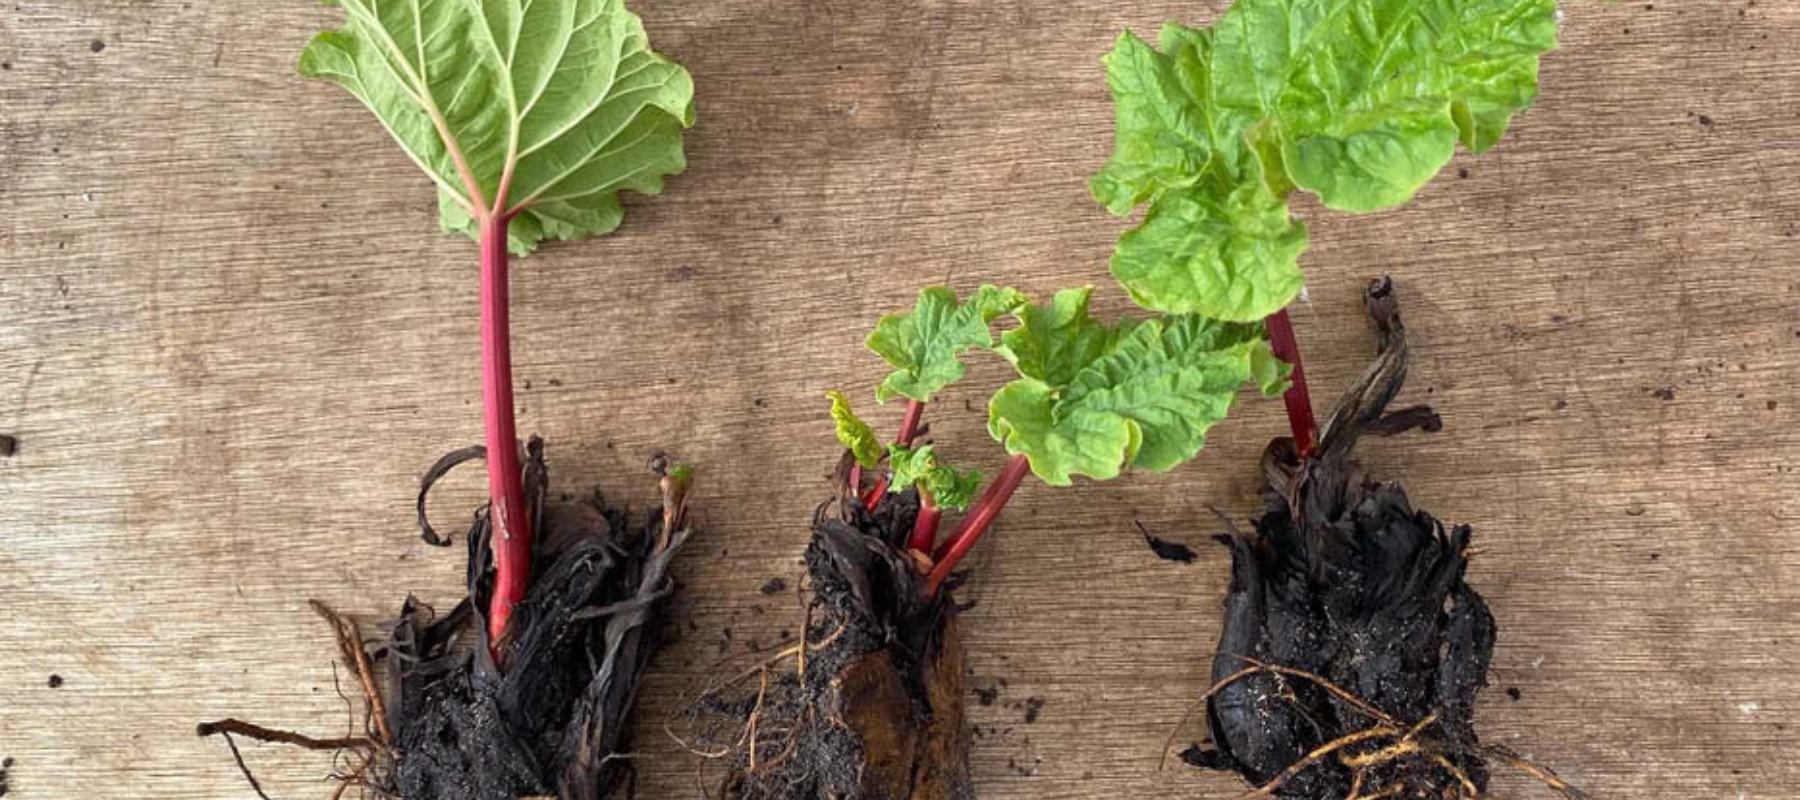 How to plant rhubarb crowns